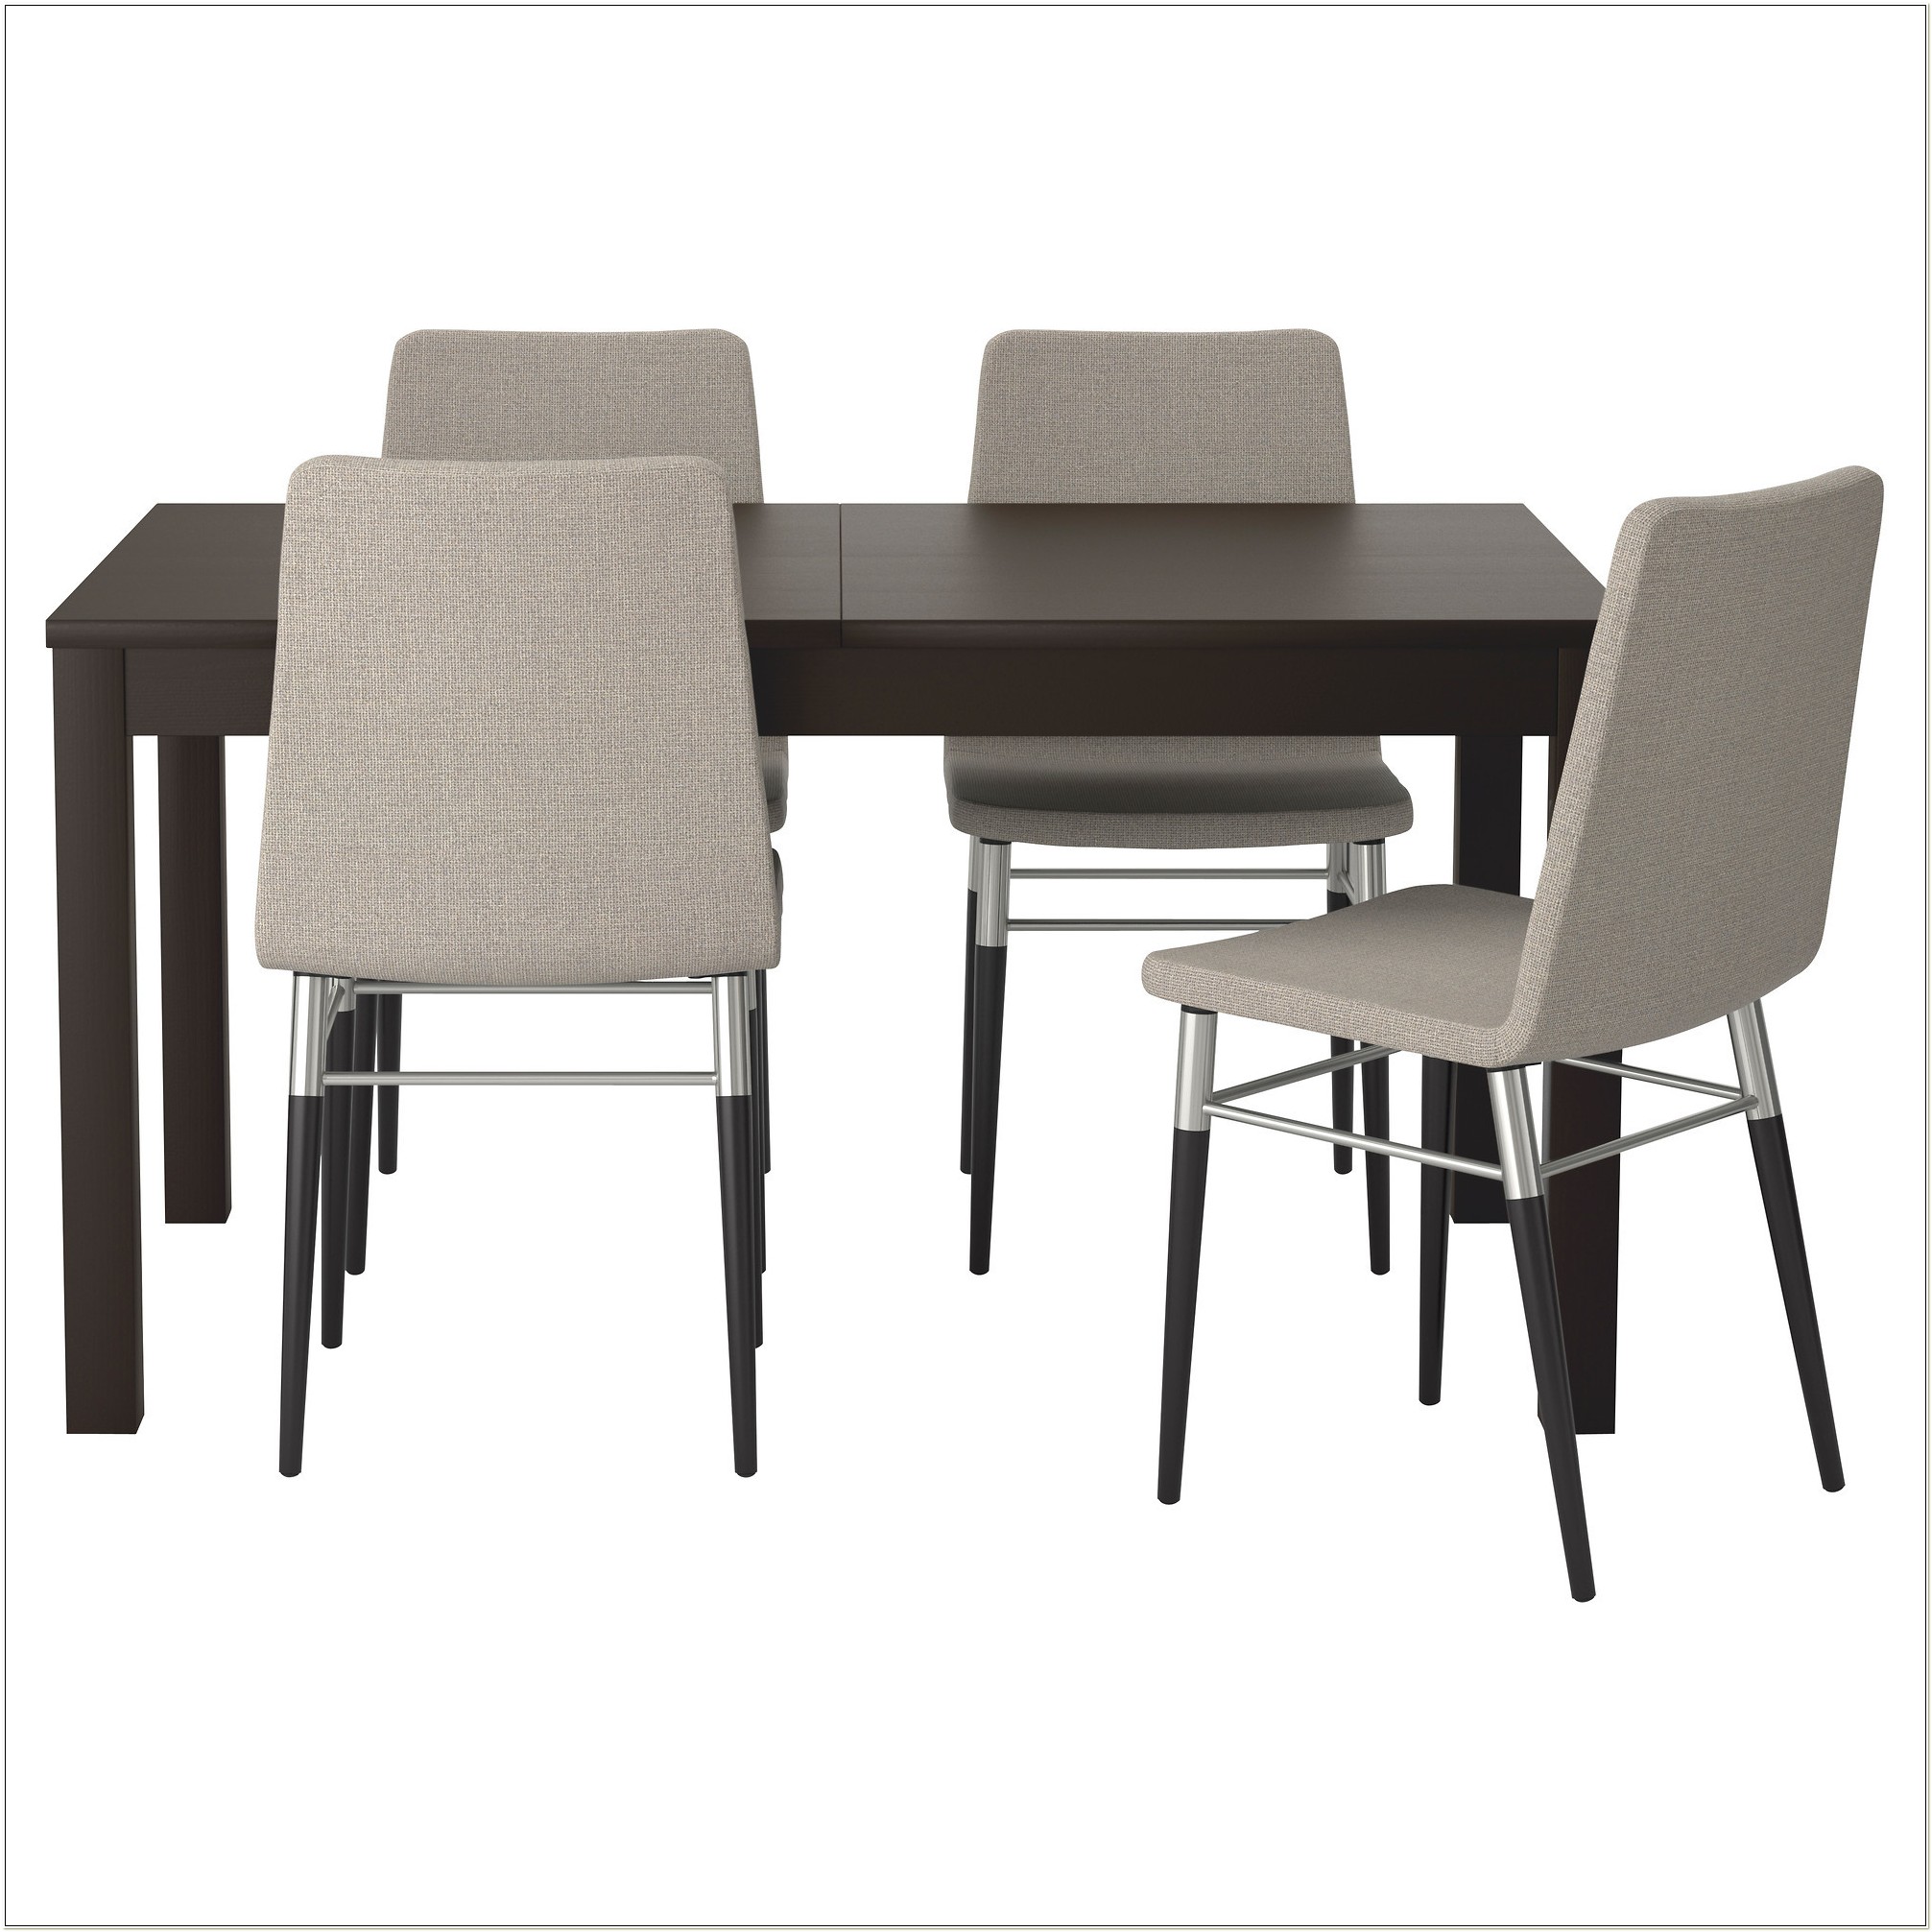 Ikea Dining Room Chairs Uk - Chairs : Home Decorating Ideas #aGVDppzjVm